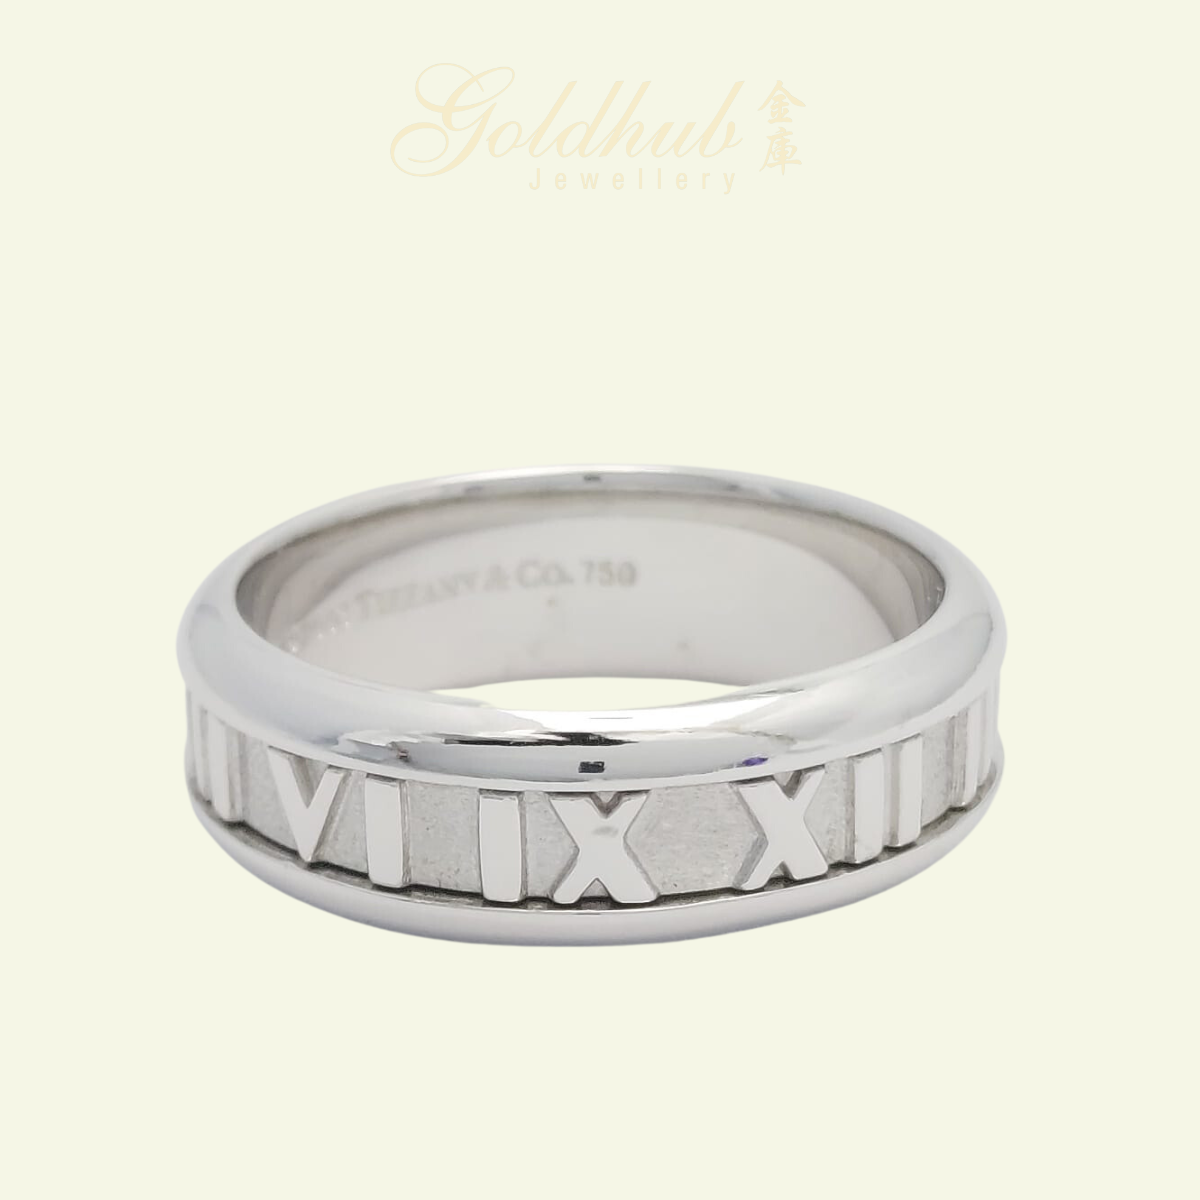 [FURTHER DISCOUNTED] 18k Pre-loved Tiffany & Co. Atlas Ring in White Gold